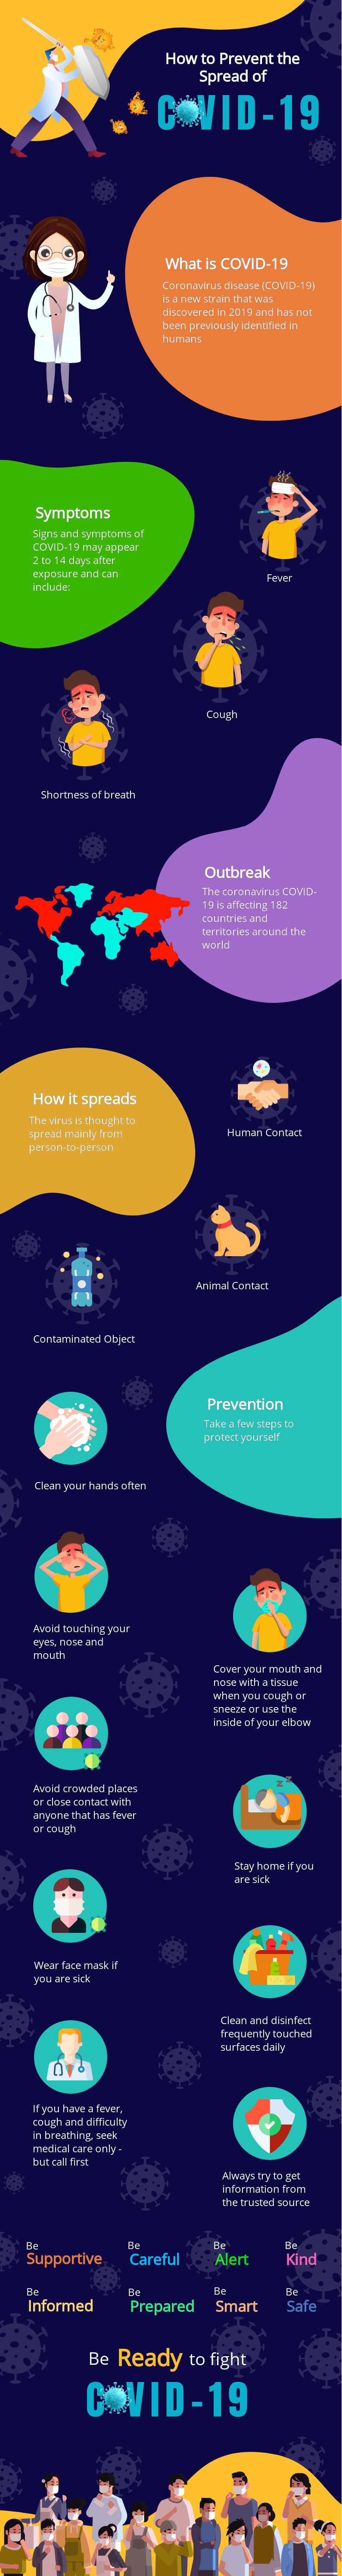 Infographic _ How to prevent COVID-19